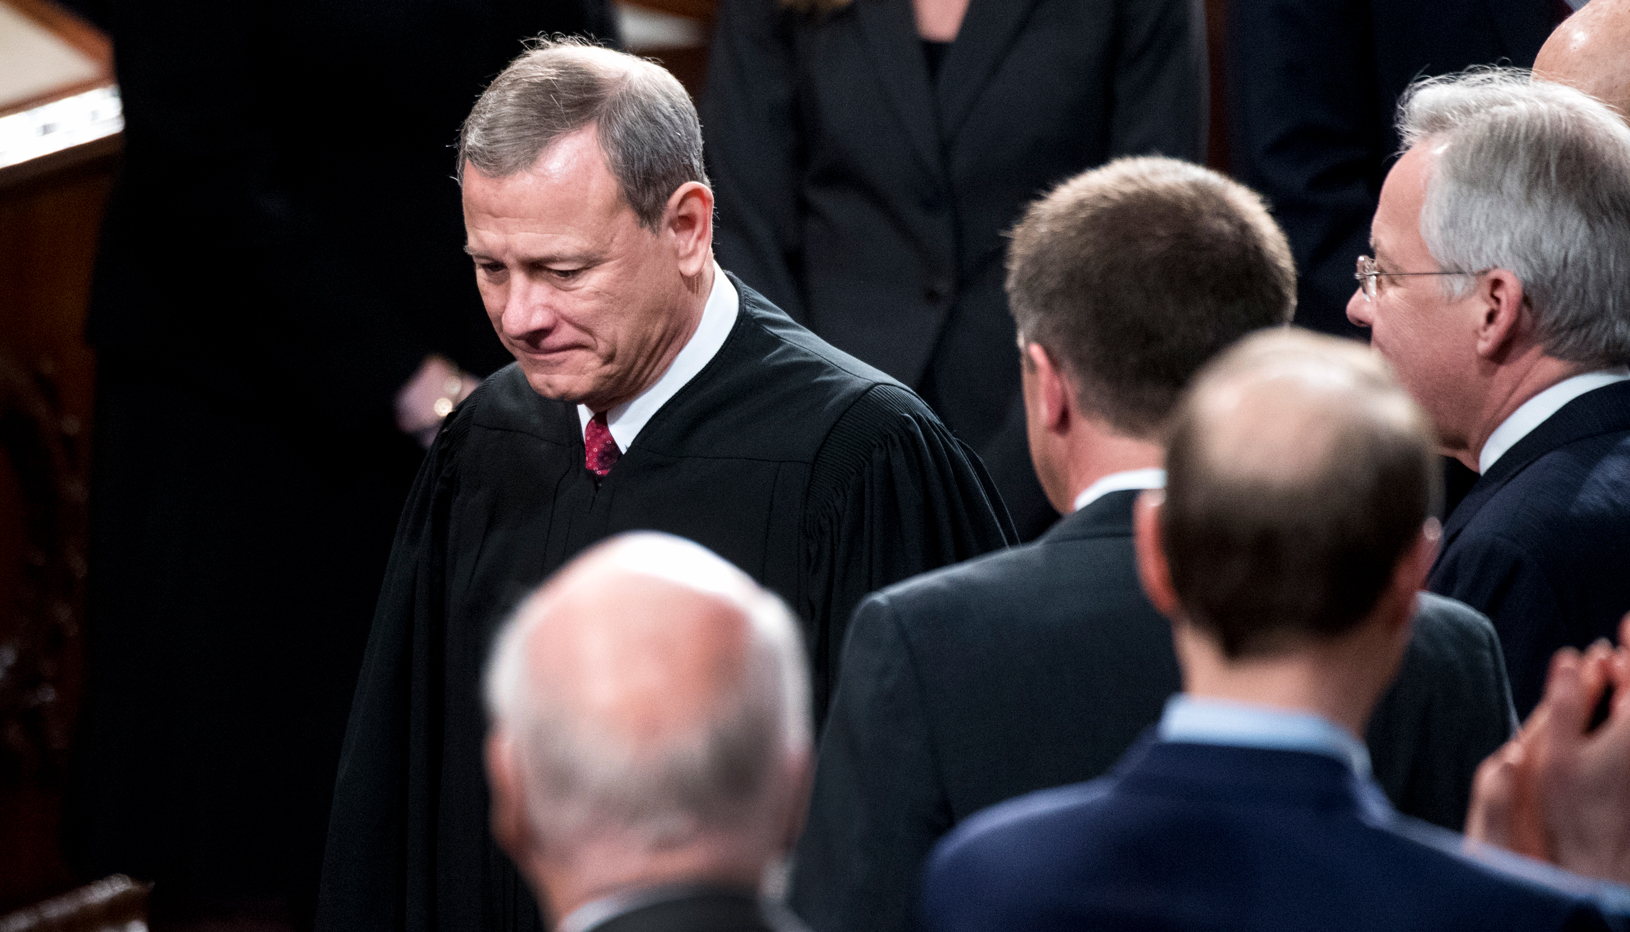 Chief Justice John Roberts stands among the crowd at President Joe Biden's inauguration